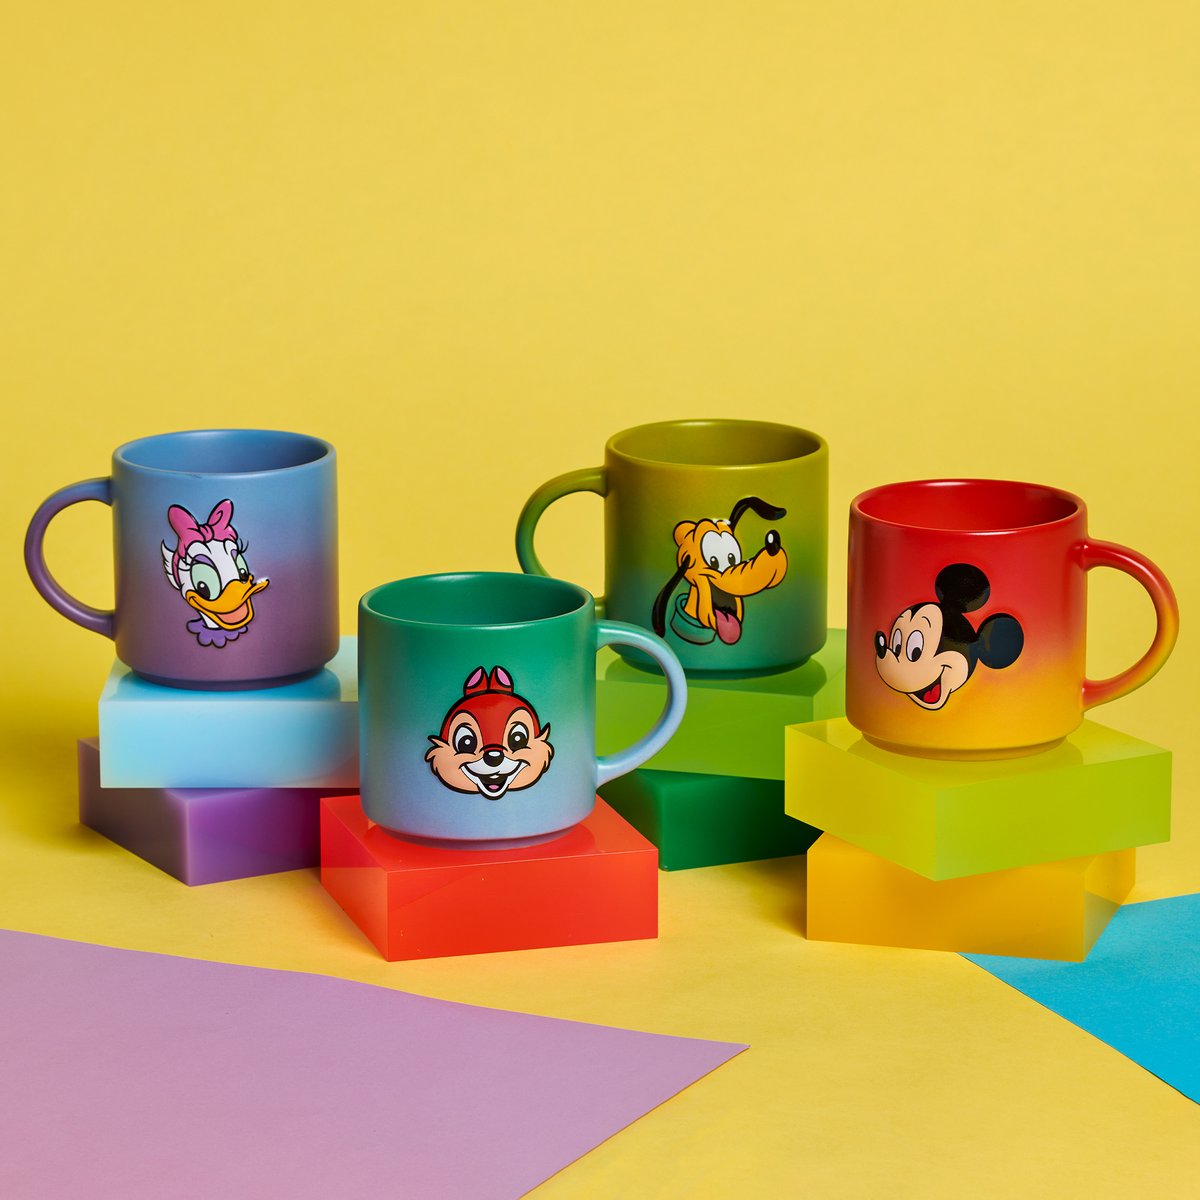 Sips with your favorite duos. di.sn/60193TrPl Which pair do you like best? 1. Mickey & Donald 2. Pluto & Goofy 3. Chip & Dale 4. Daisy & Minnie